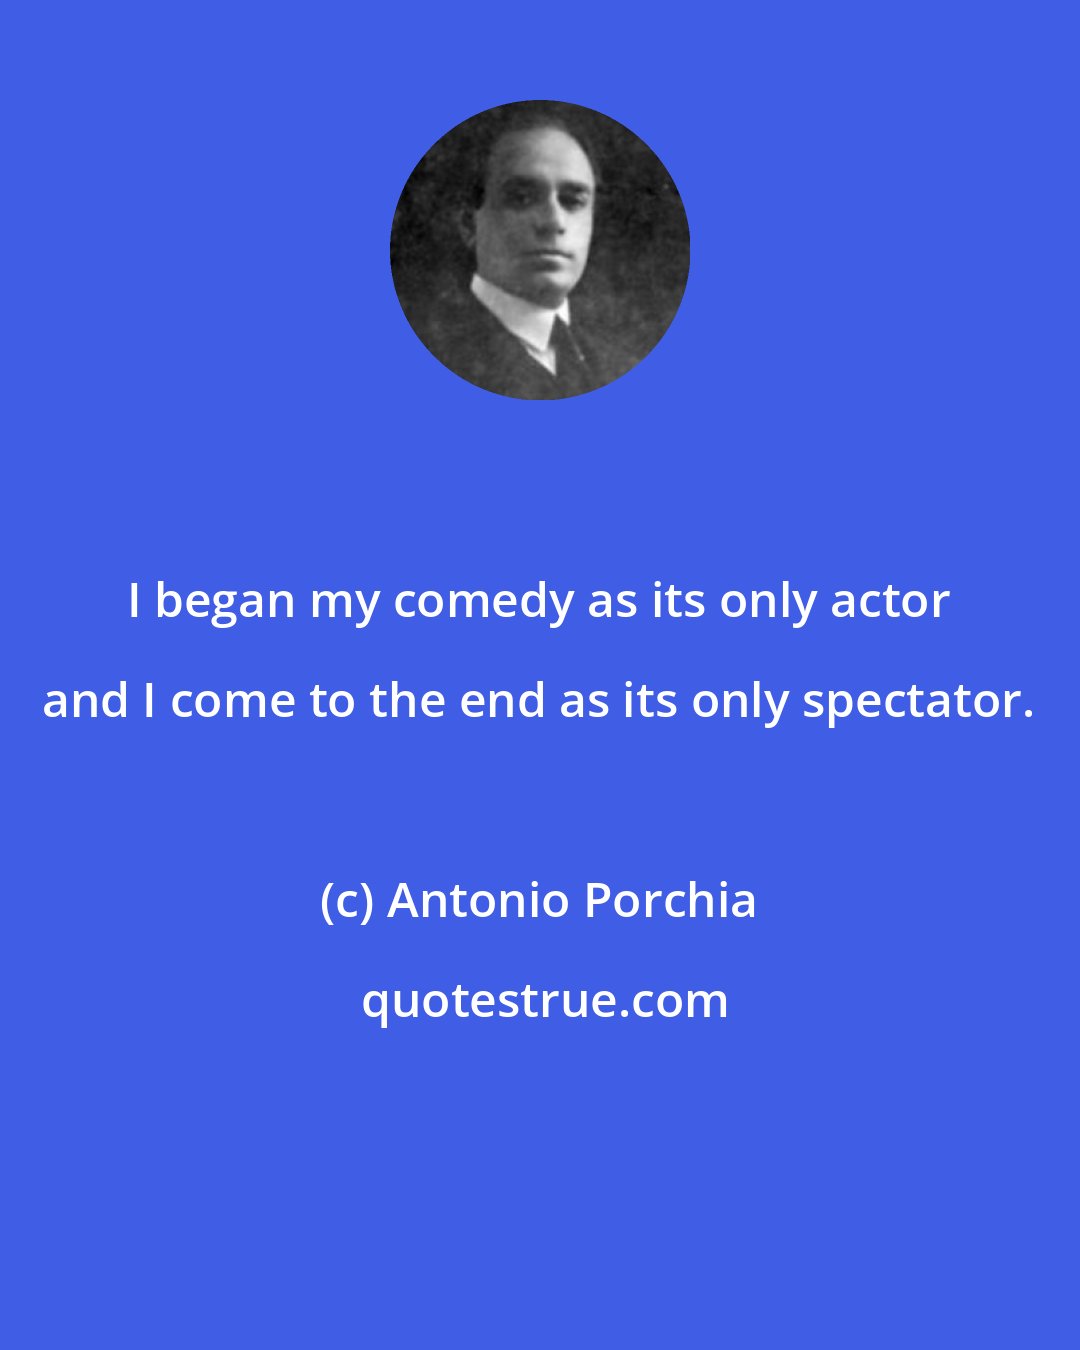 Antonio Porchia: I began my comedy as its only actor and I come to the end as its only spectator.